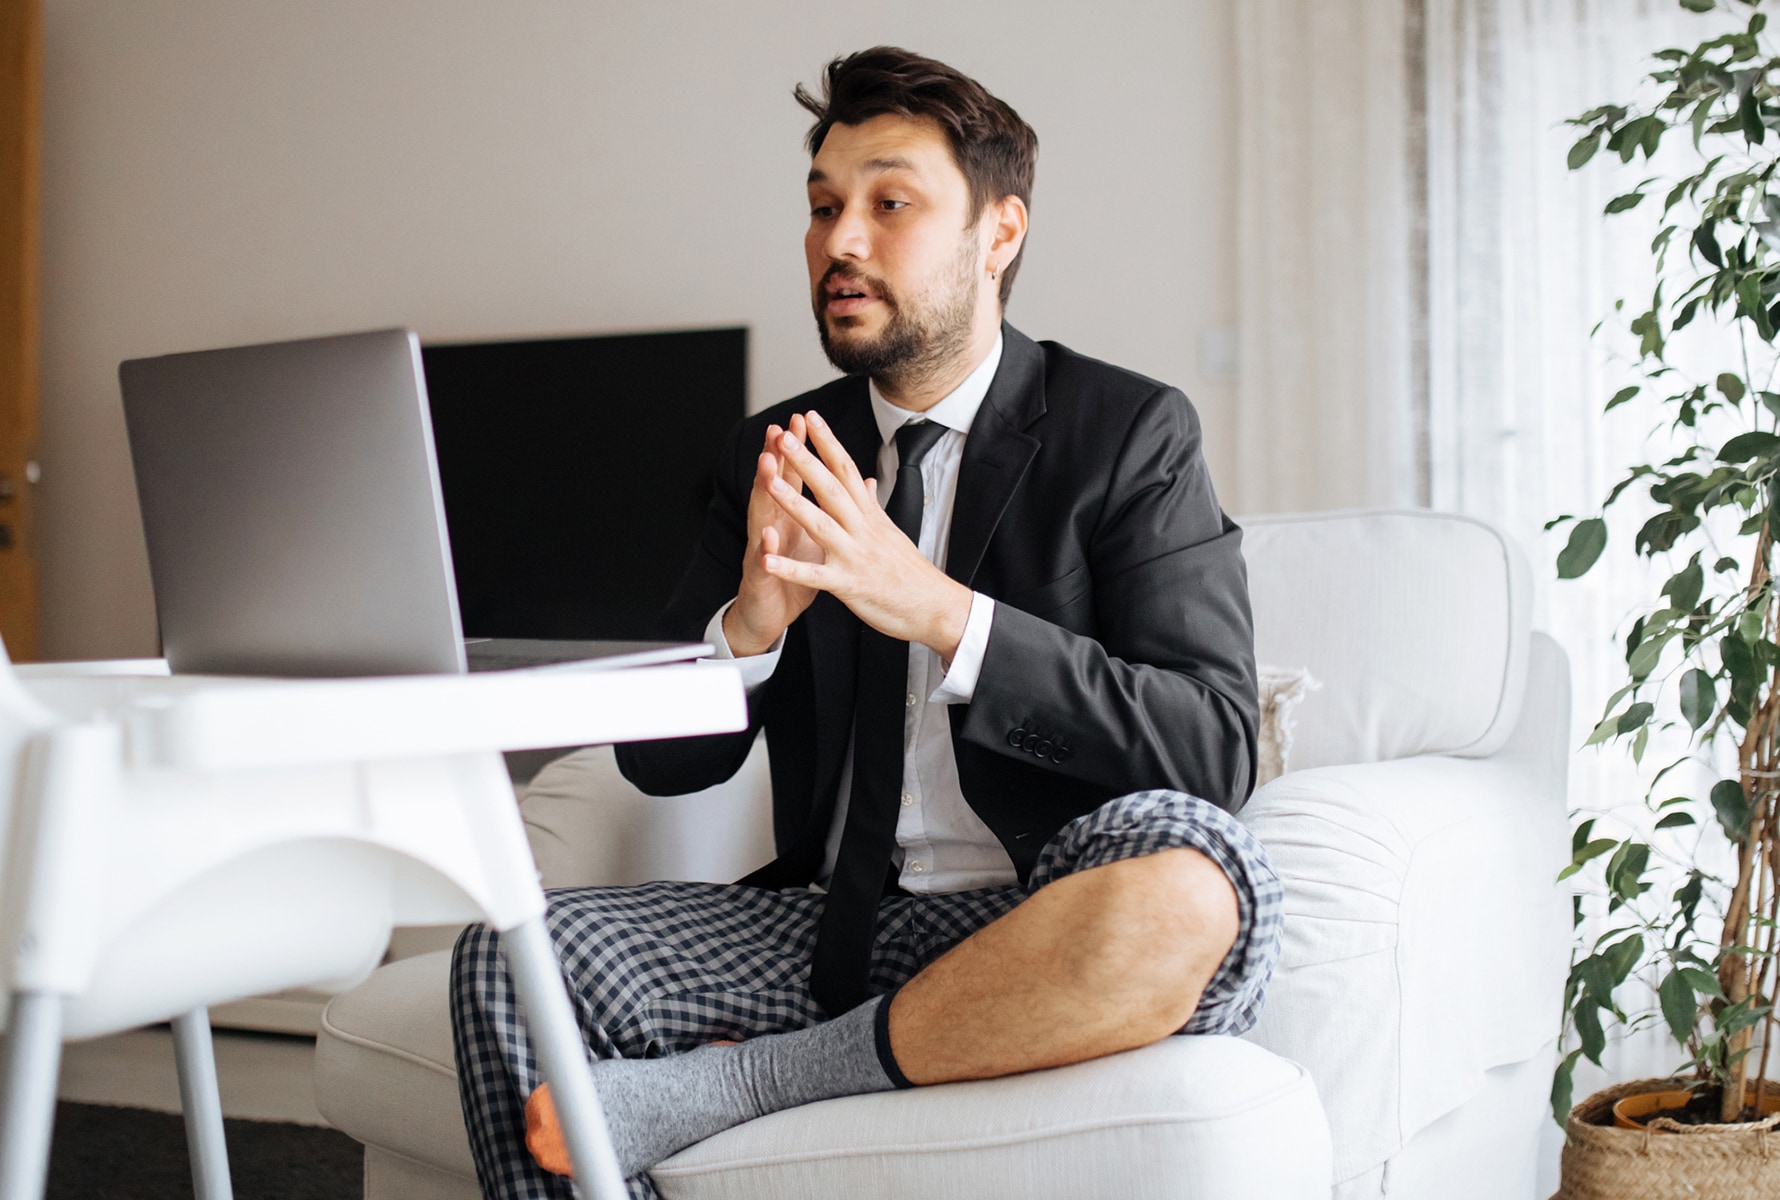 A man wearing a suit and pyjamas working from his sofa